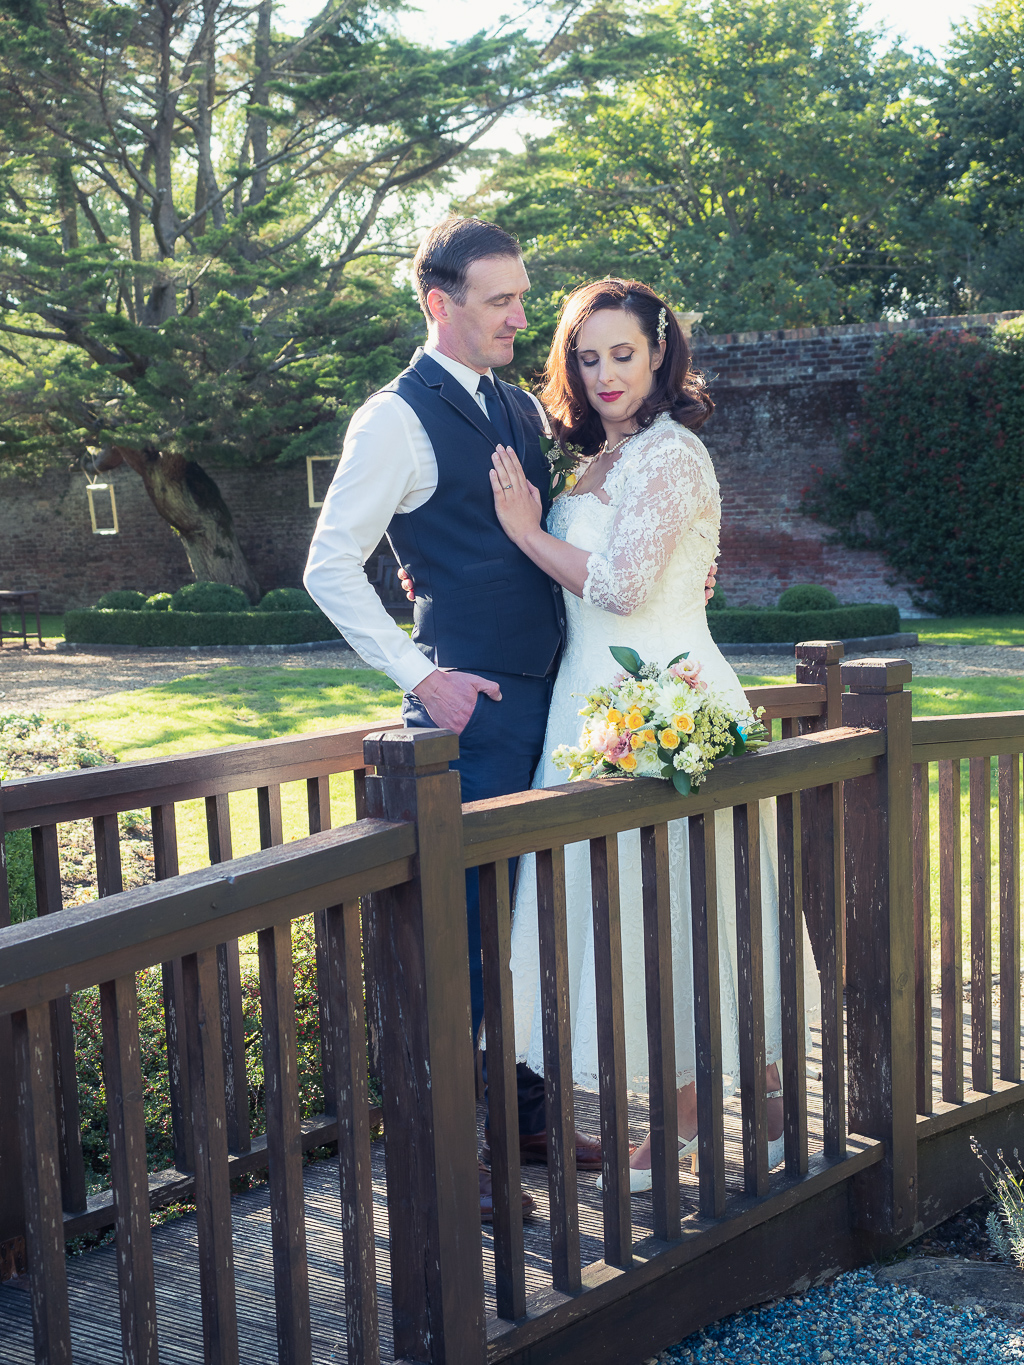 Traditional vintage styled wedding photoshoot at The Orangery Suite, photographer credit Dom Brenton Photography (17)